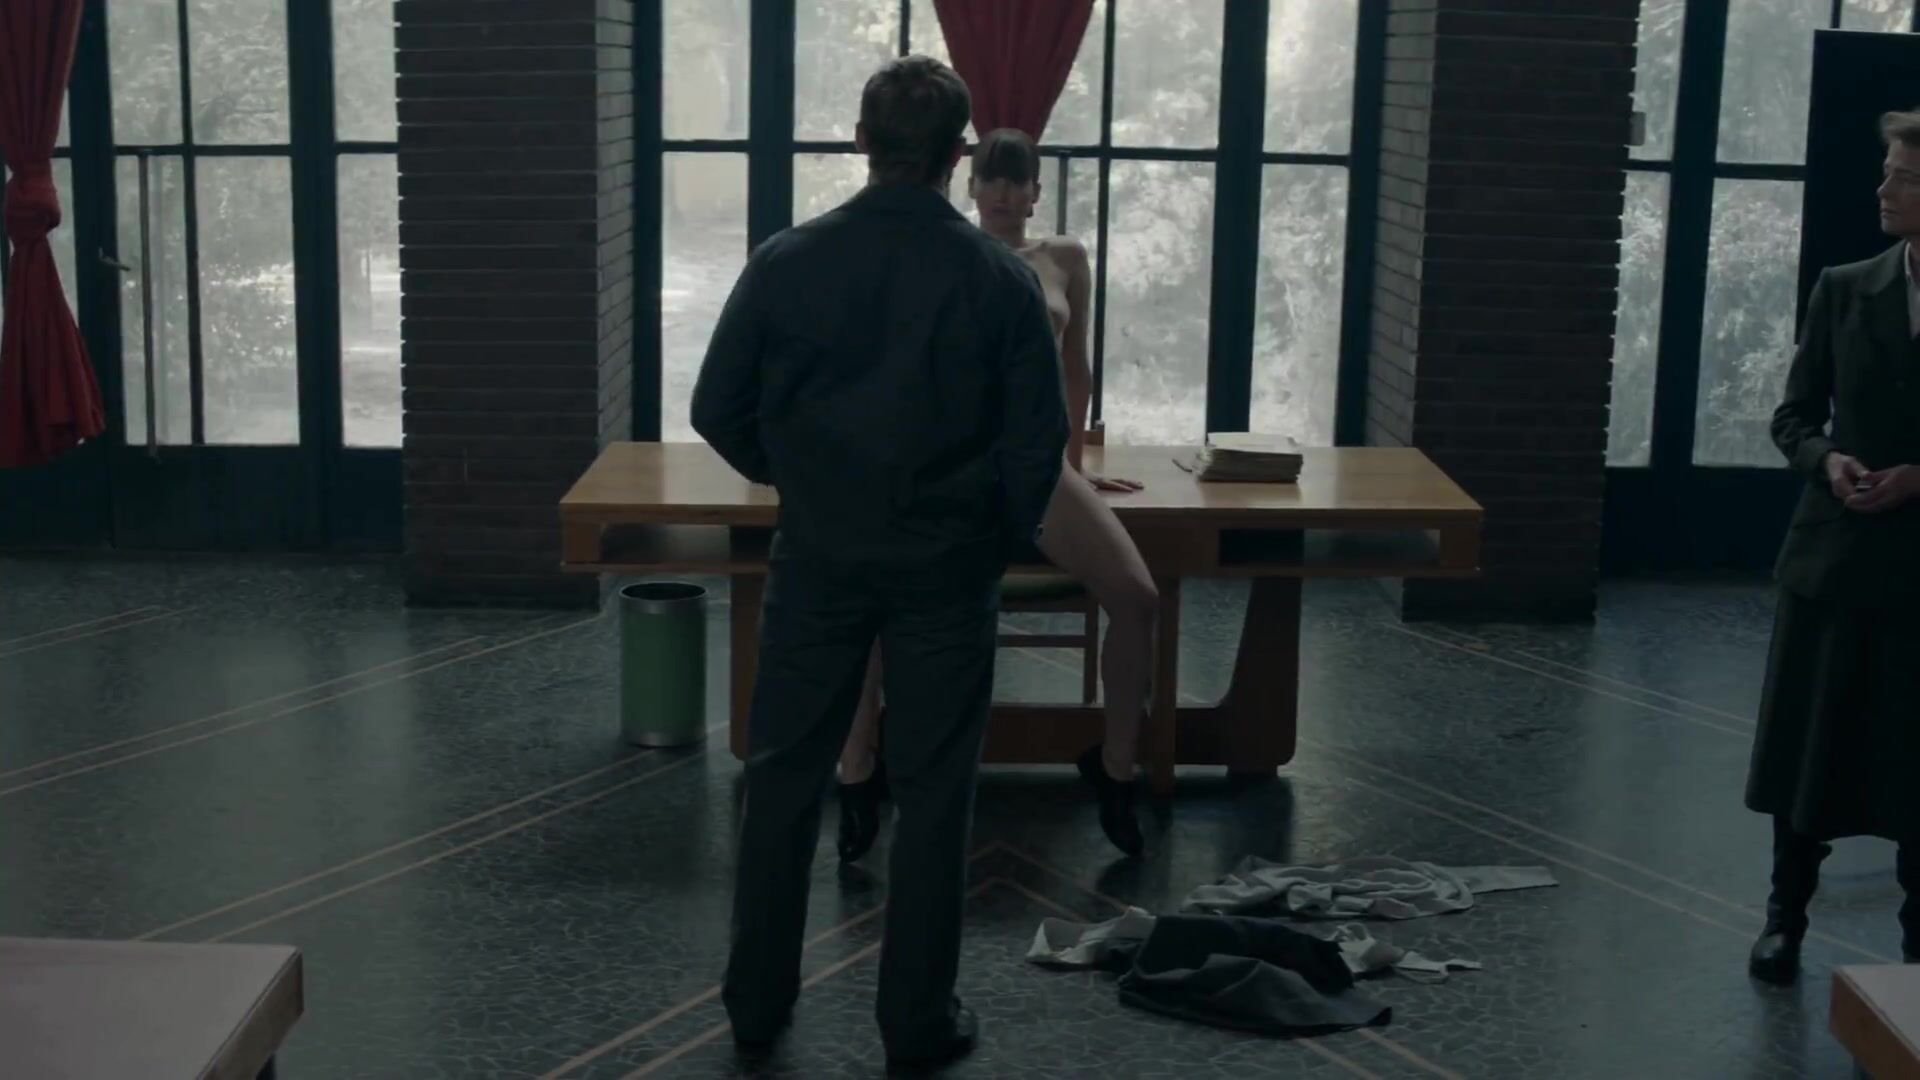 Groupsex Jennifer Lawrence looks sexy and hot stripping down and being fucked in Red Sparrow BlogUpforit - 2